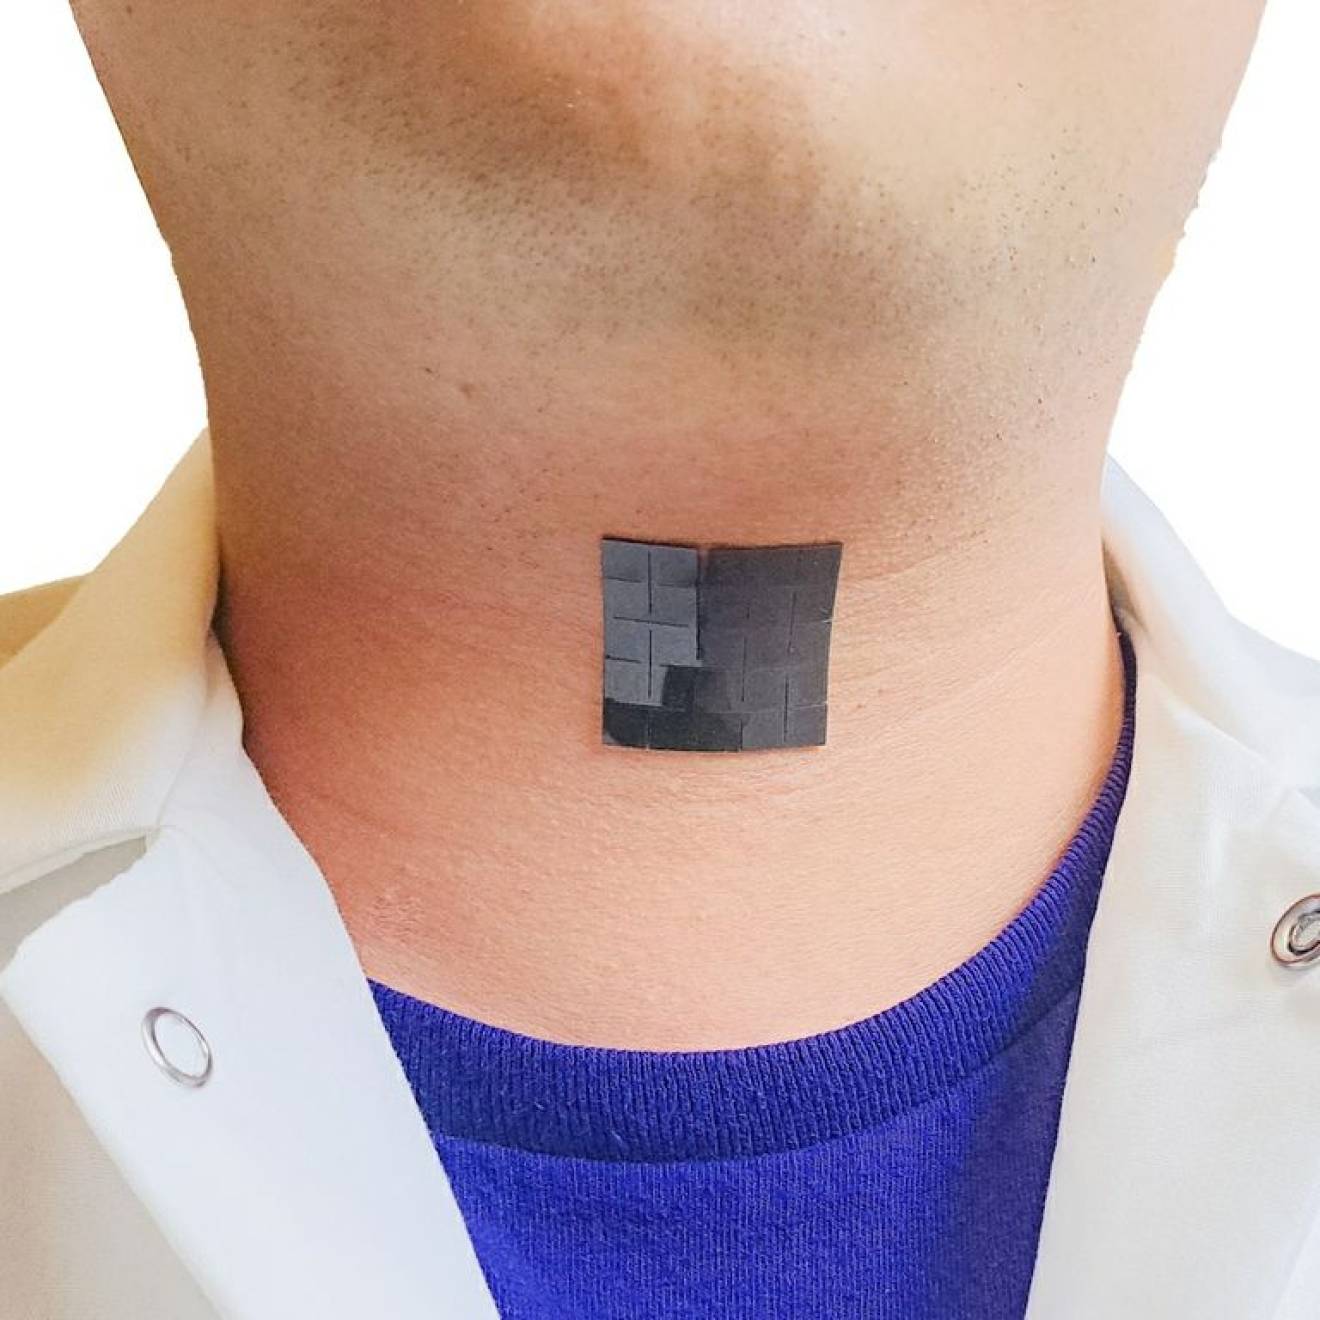 A black patch in the middle of a person's neck